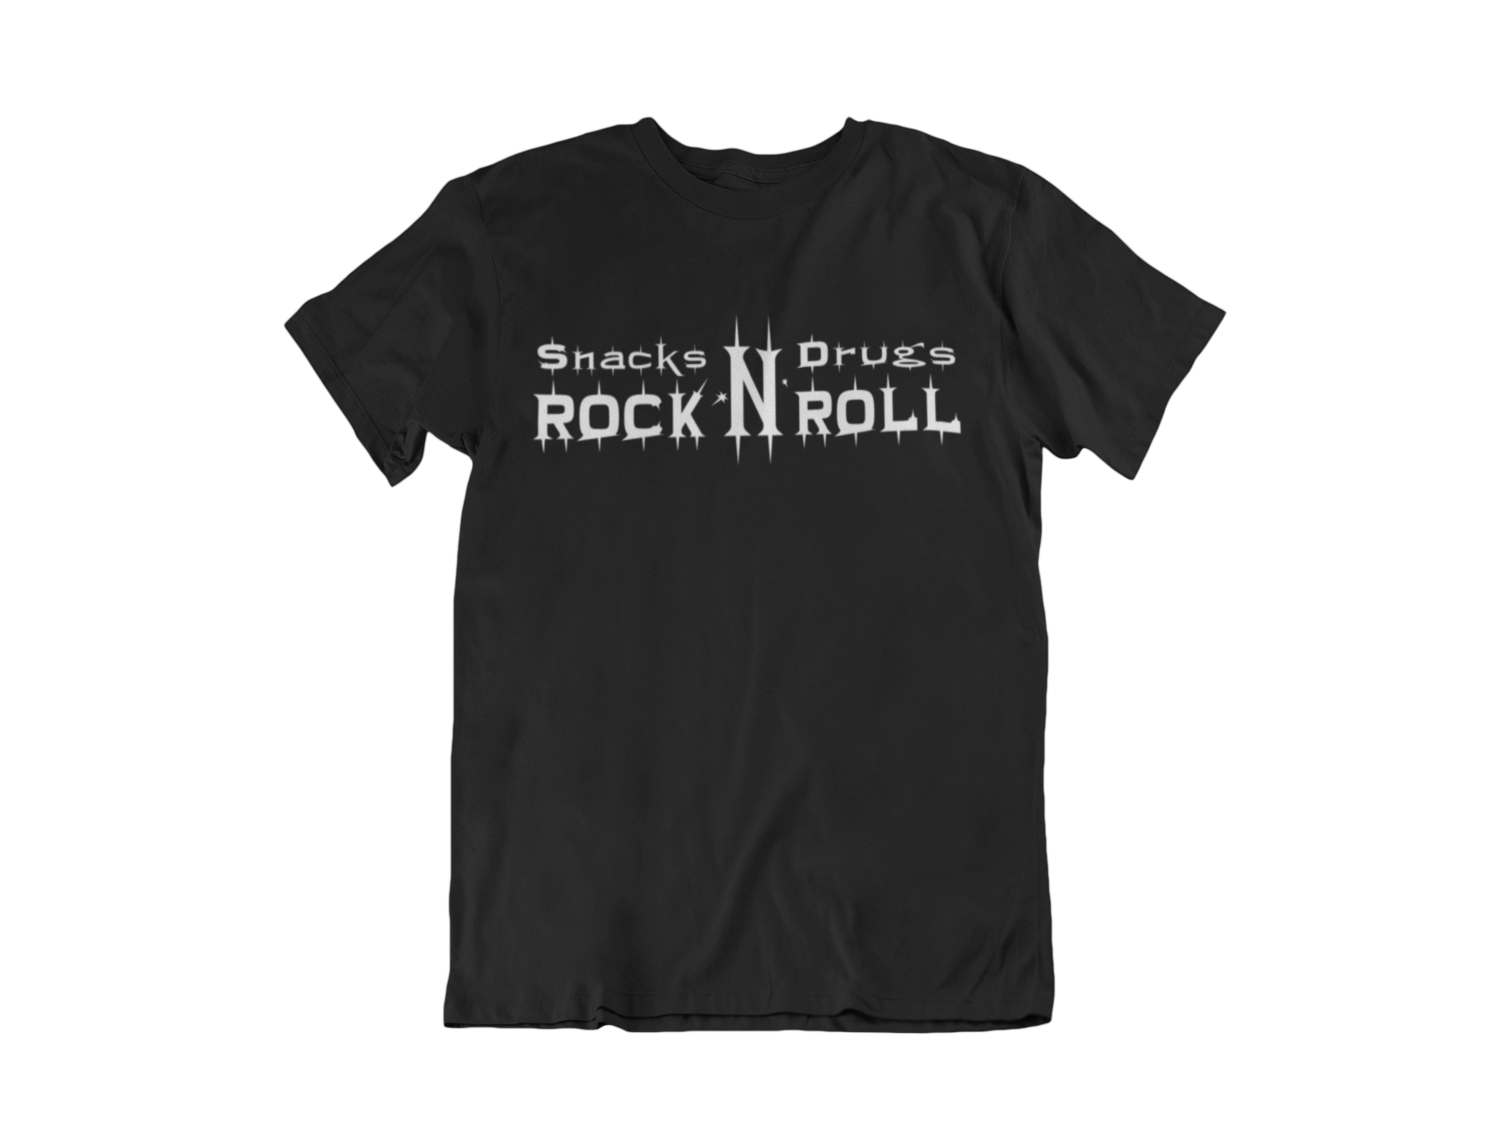 SNACKS DRUGS ROCK AND ROLL T-SHIRT MAN BY SUBCULTBILLY DESIGN